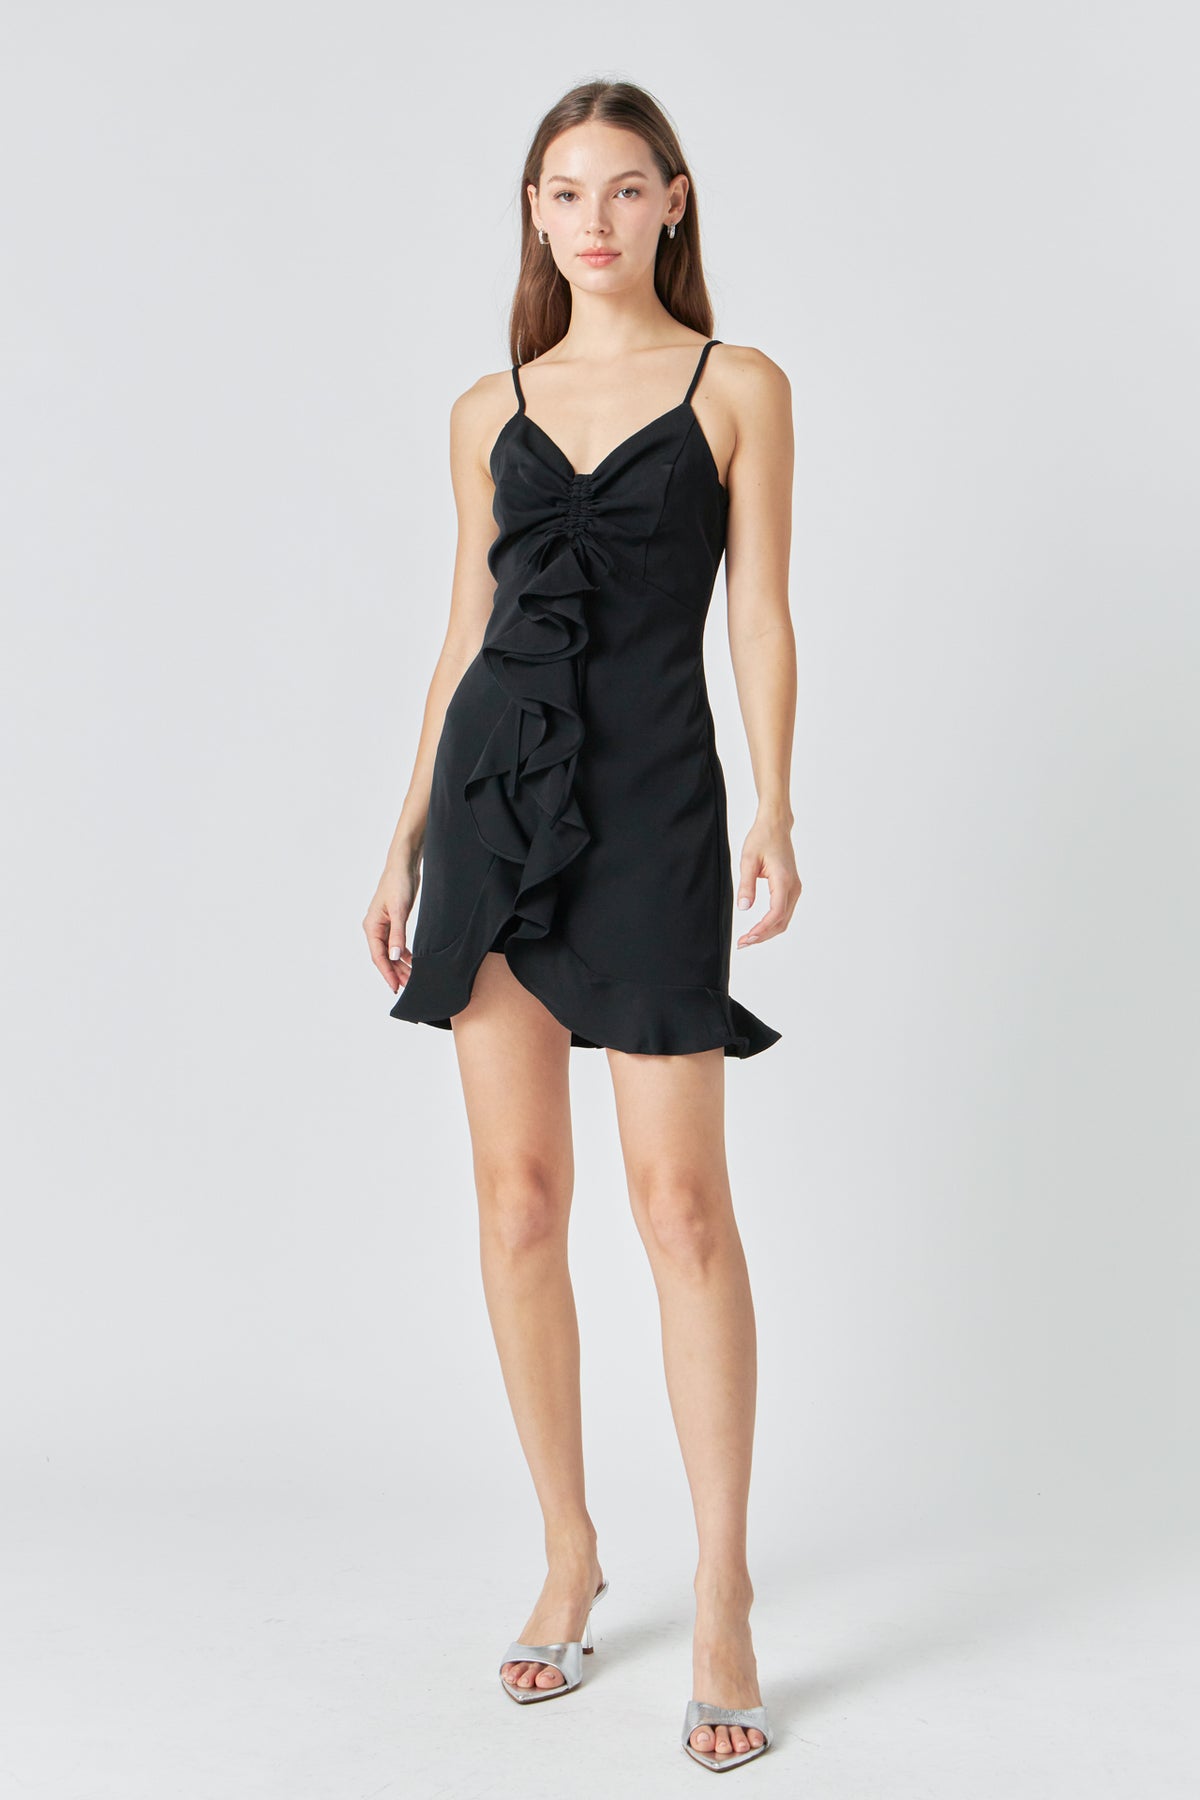 ENDLESS ROSE - Ruffled Mini Dress - DRESSES available at Objectrare